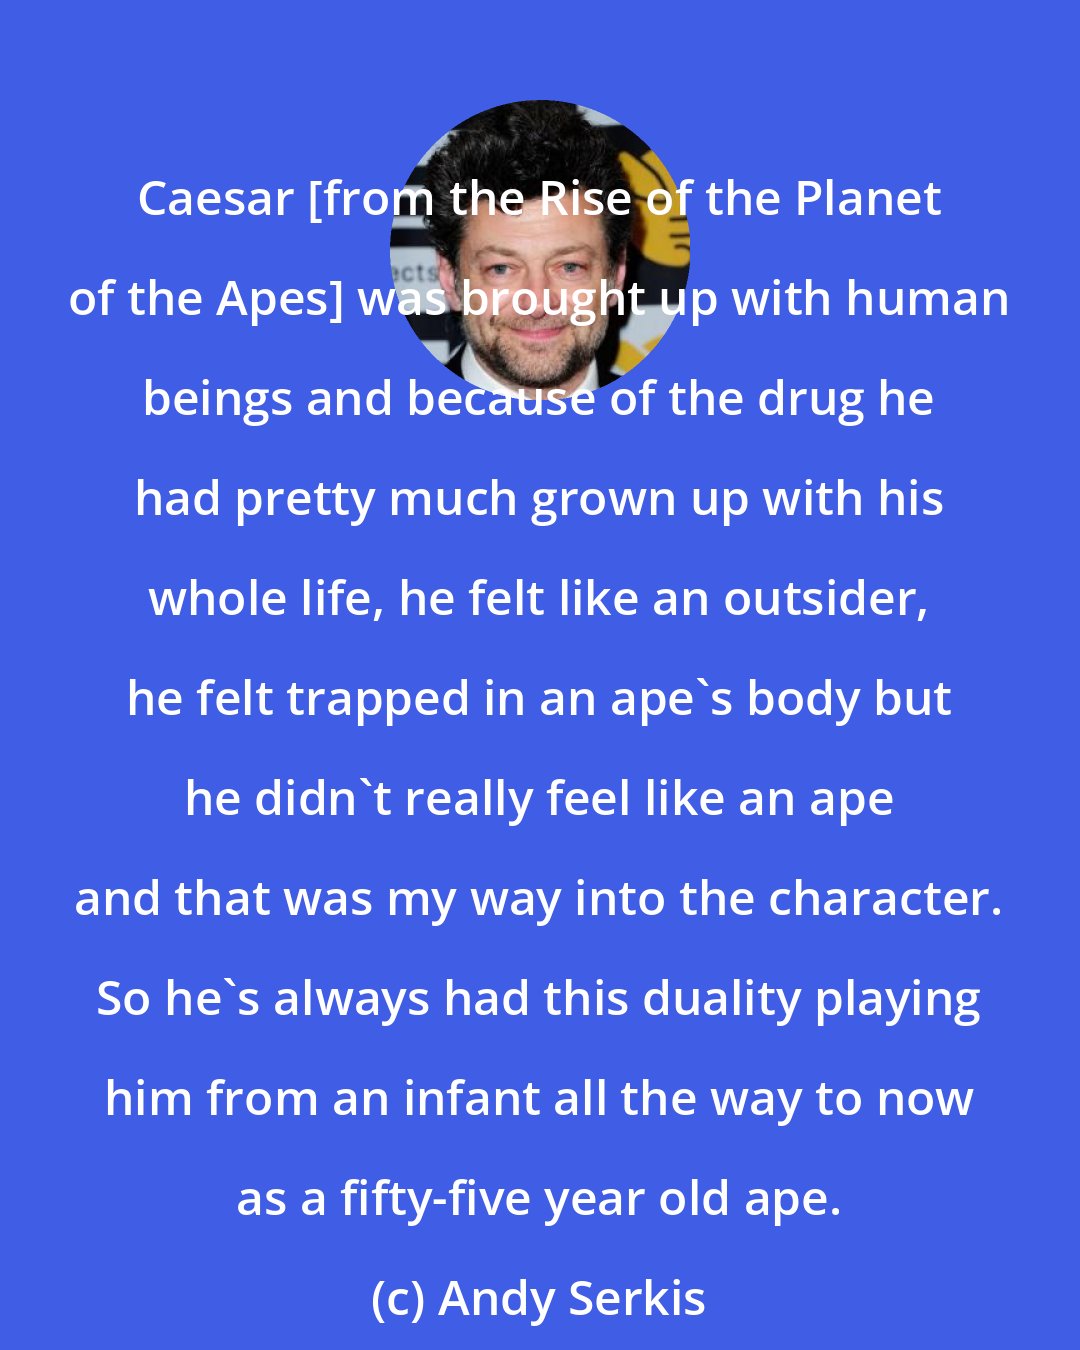 Andy Serkis: Caesar [from the Rise of the Planet of the Apes] was brought up with human beings and because of the drug he had pretty much grown up with his whole life, he felt like an outsider, he felt trapped in an ape's body but he didn't really feel like an ape and that was my way into the character. So he's always had this duality playing him from an infant all the way to now as a fifty-five year old ape.